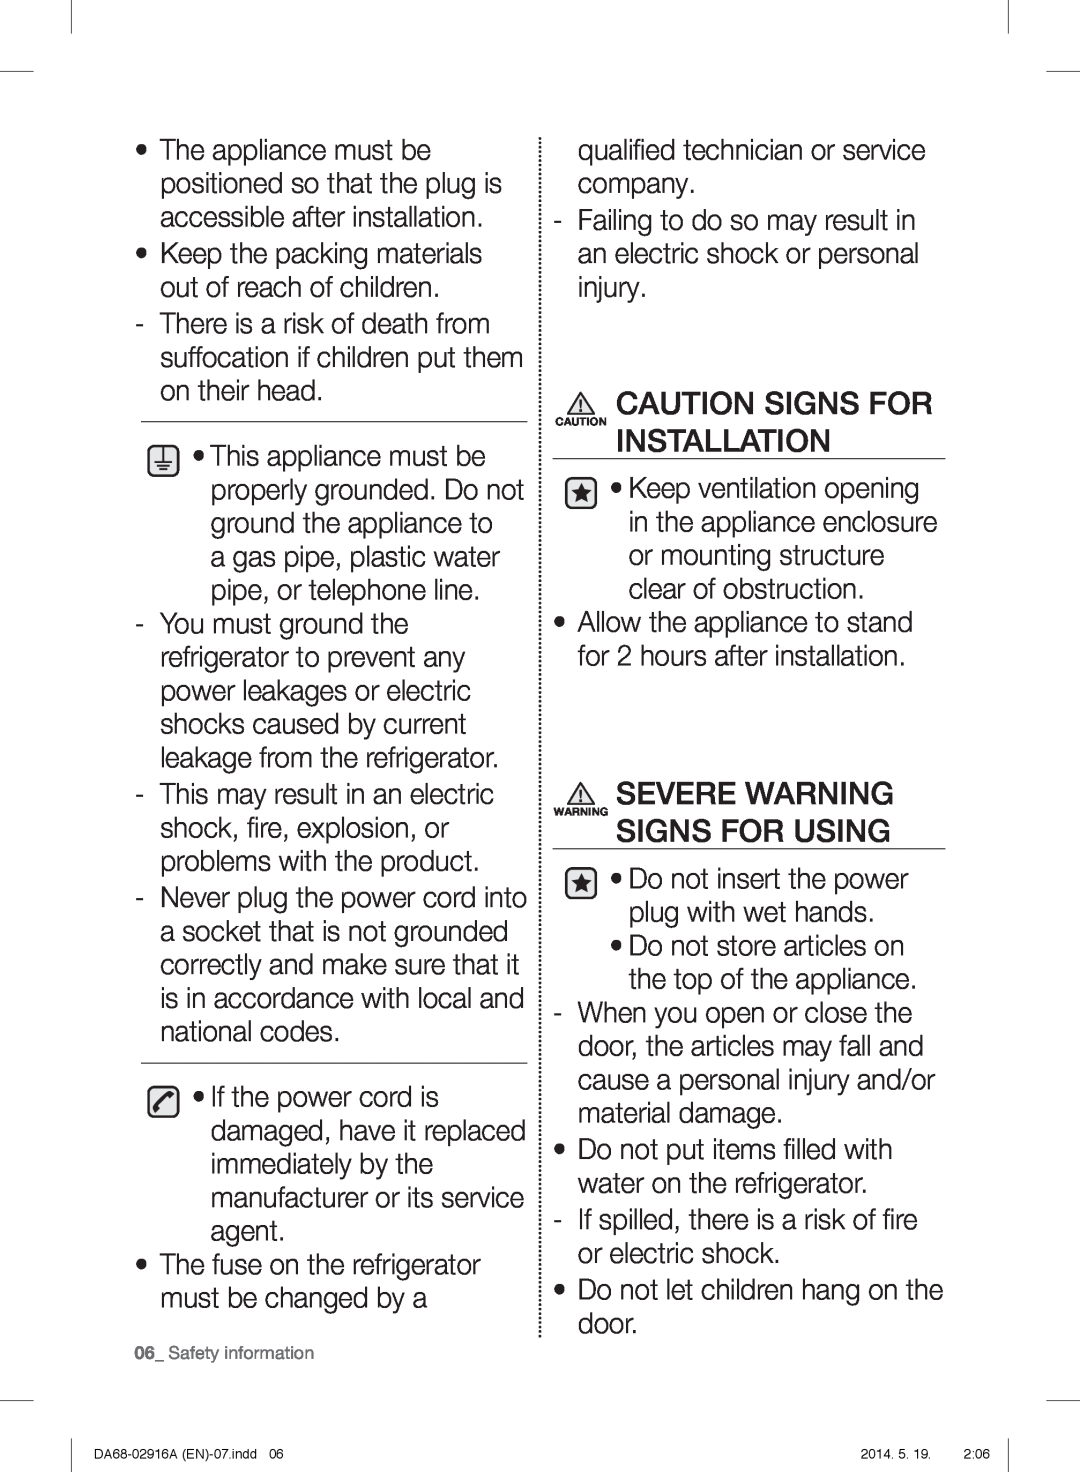 Samsung RF24FSEDBSR user manual Caution Signs For, Installation, Signs For Using, Severe Warning 